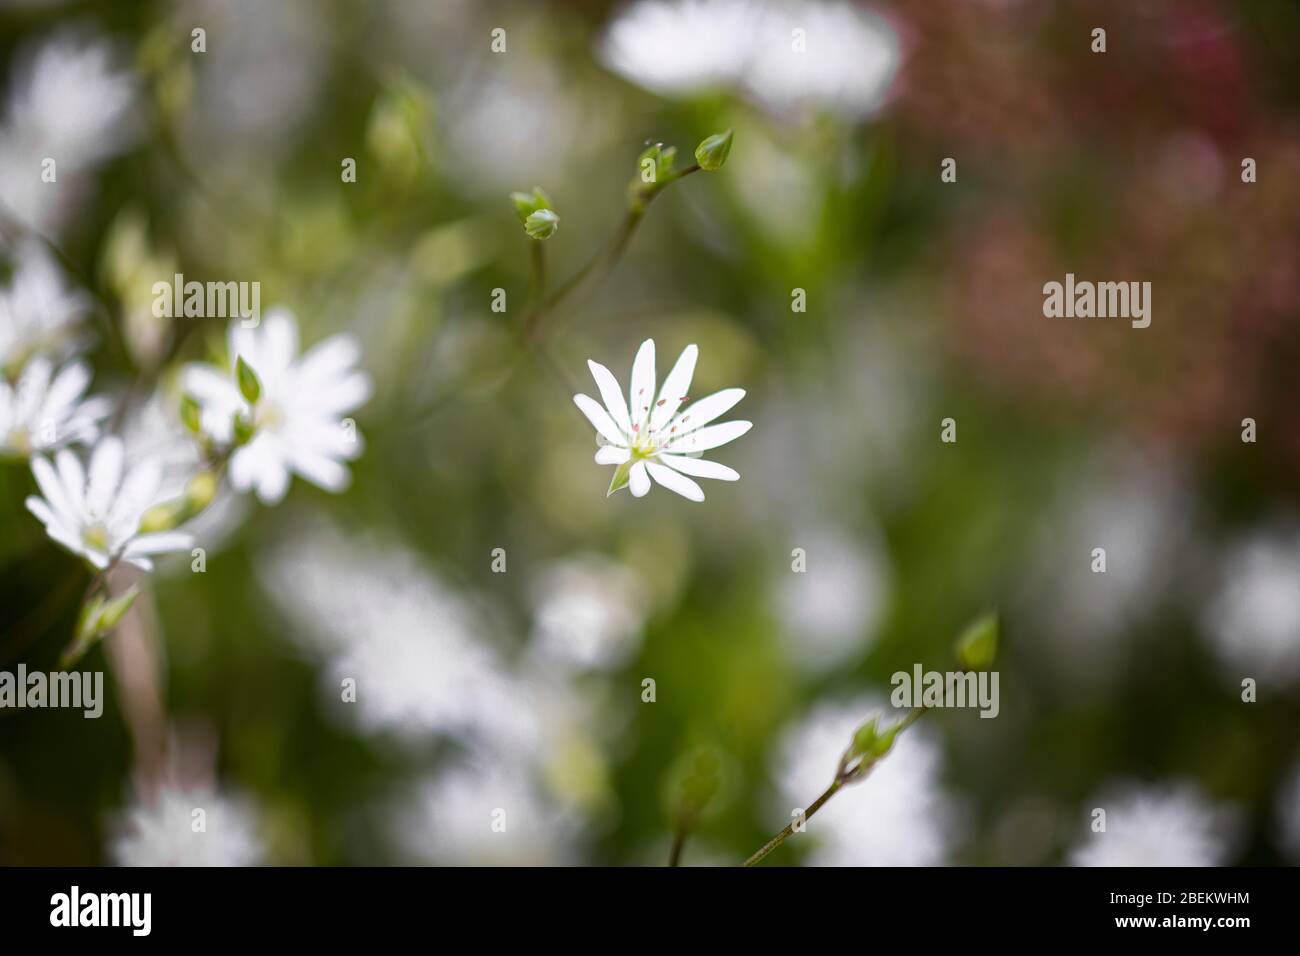 Beautiful closeup of white blooming common starwort flower with greenery in the background Stock Photo